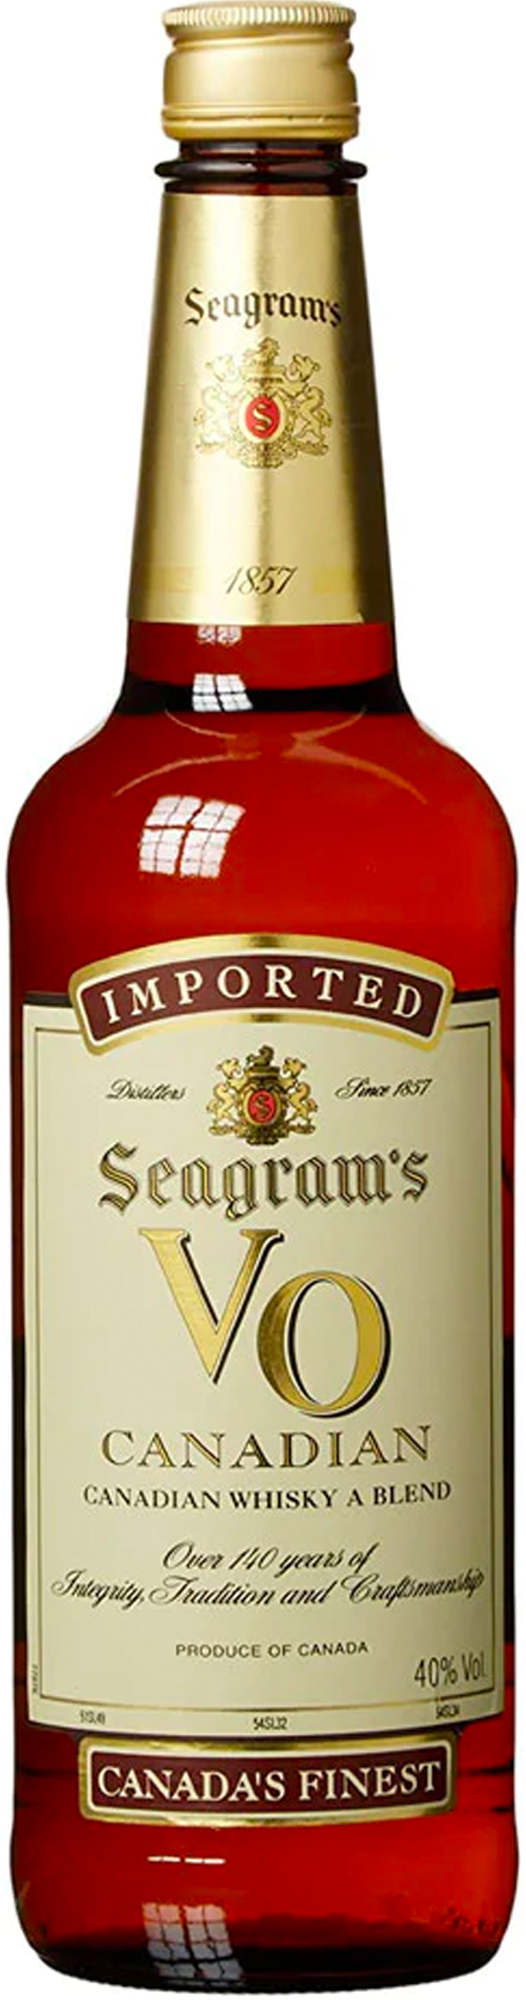 Seagram's Vo Canadian Whisky 1L